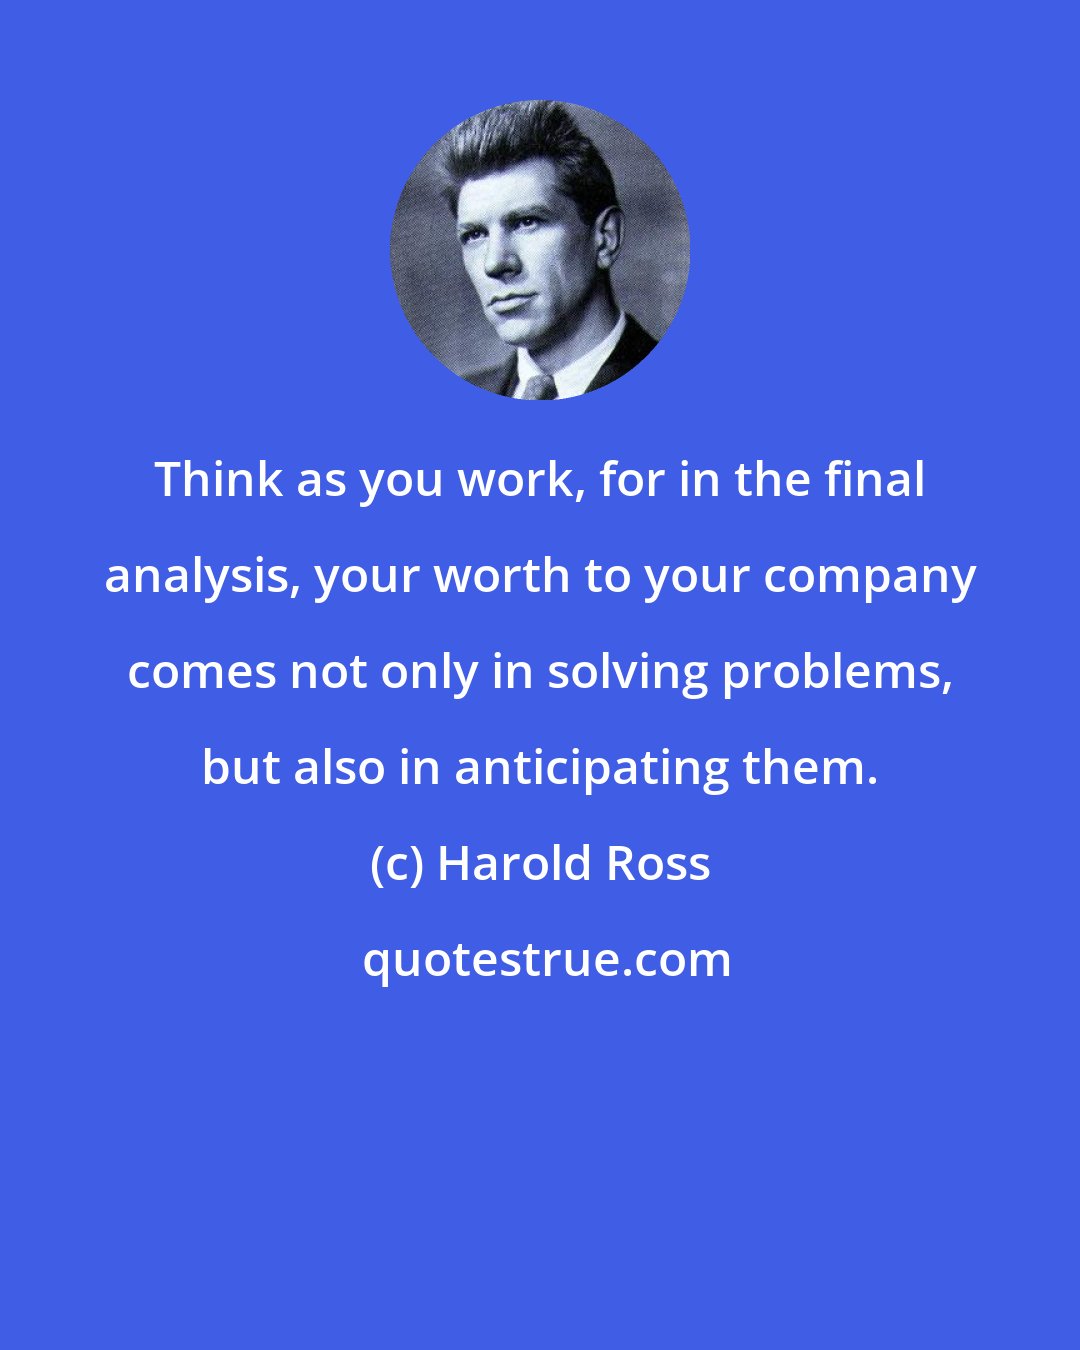 Harold Ross: Think as you work, for in the final analysis, your worth to your company comes not only in solving problems, but also in anticipating them.